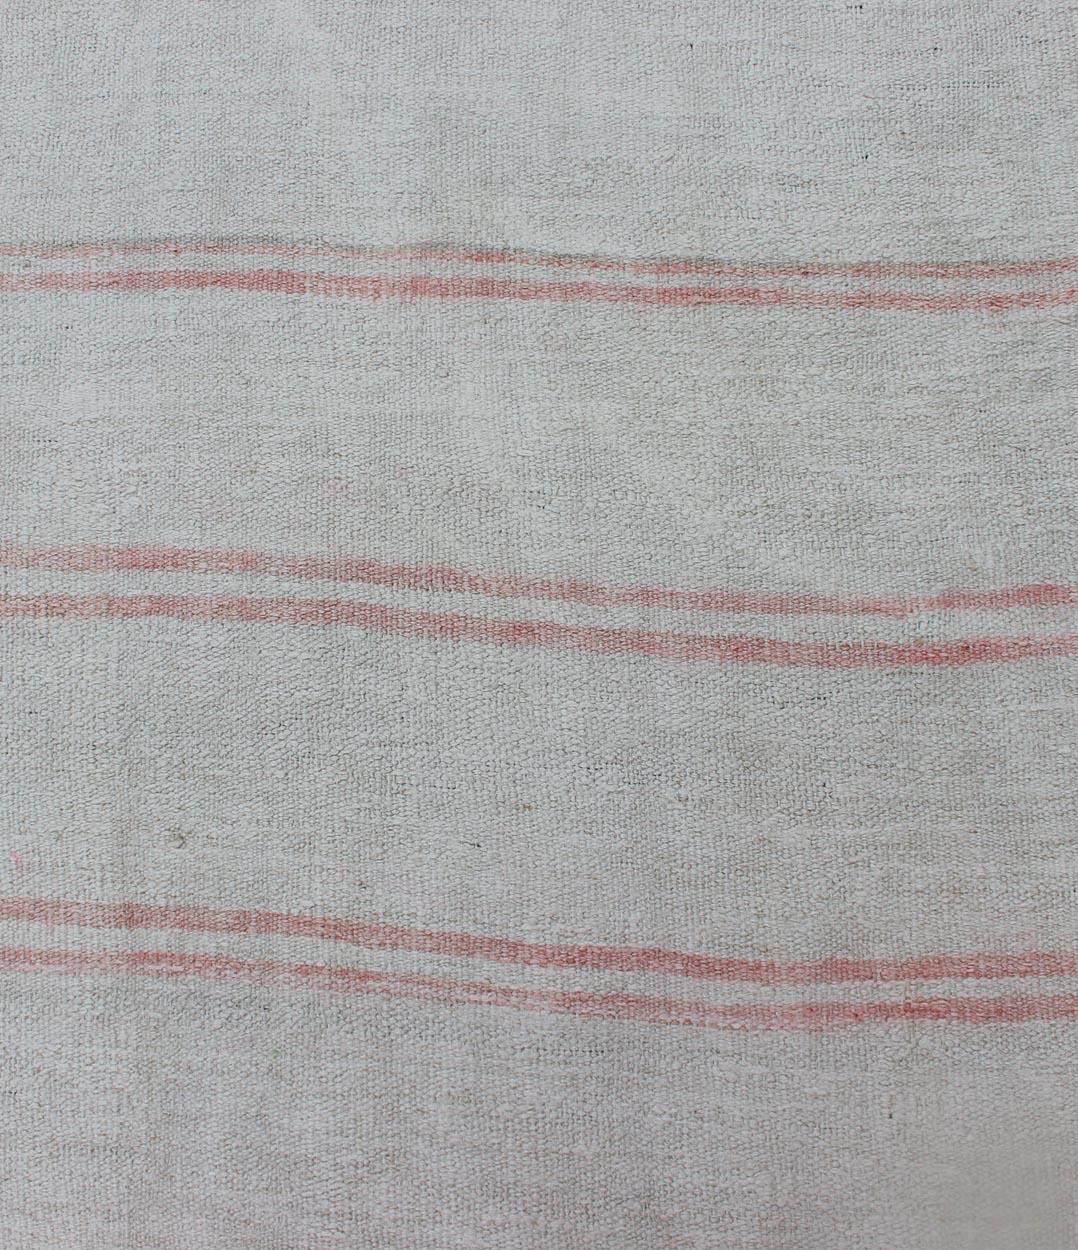 Wool Vintage Turkish Kilim Runner with Stripes in Light Coral and Neutral Tones For Sale